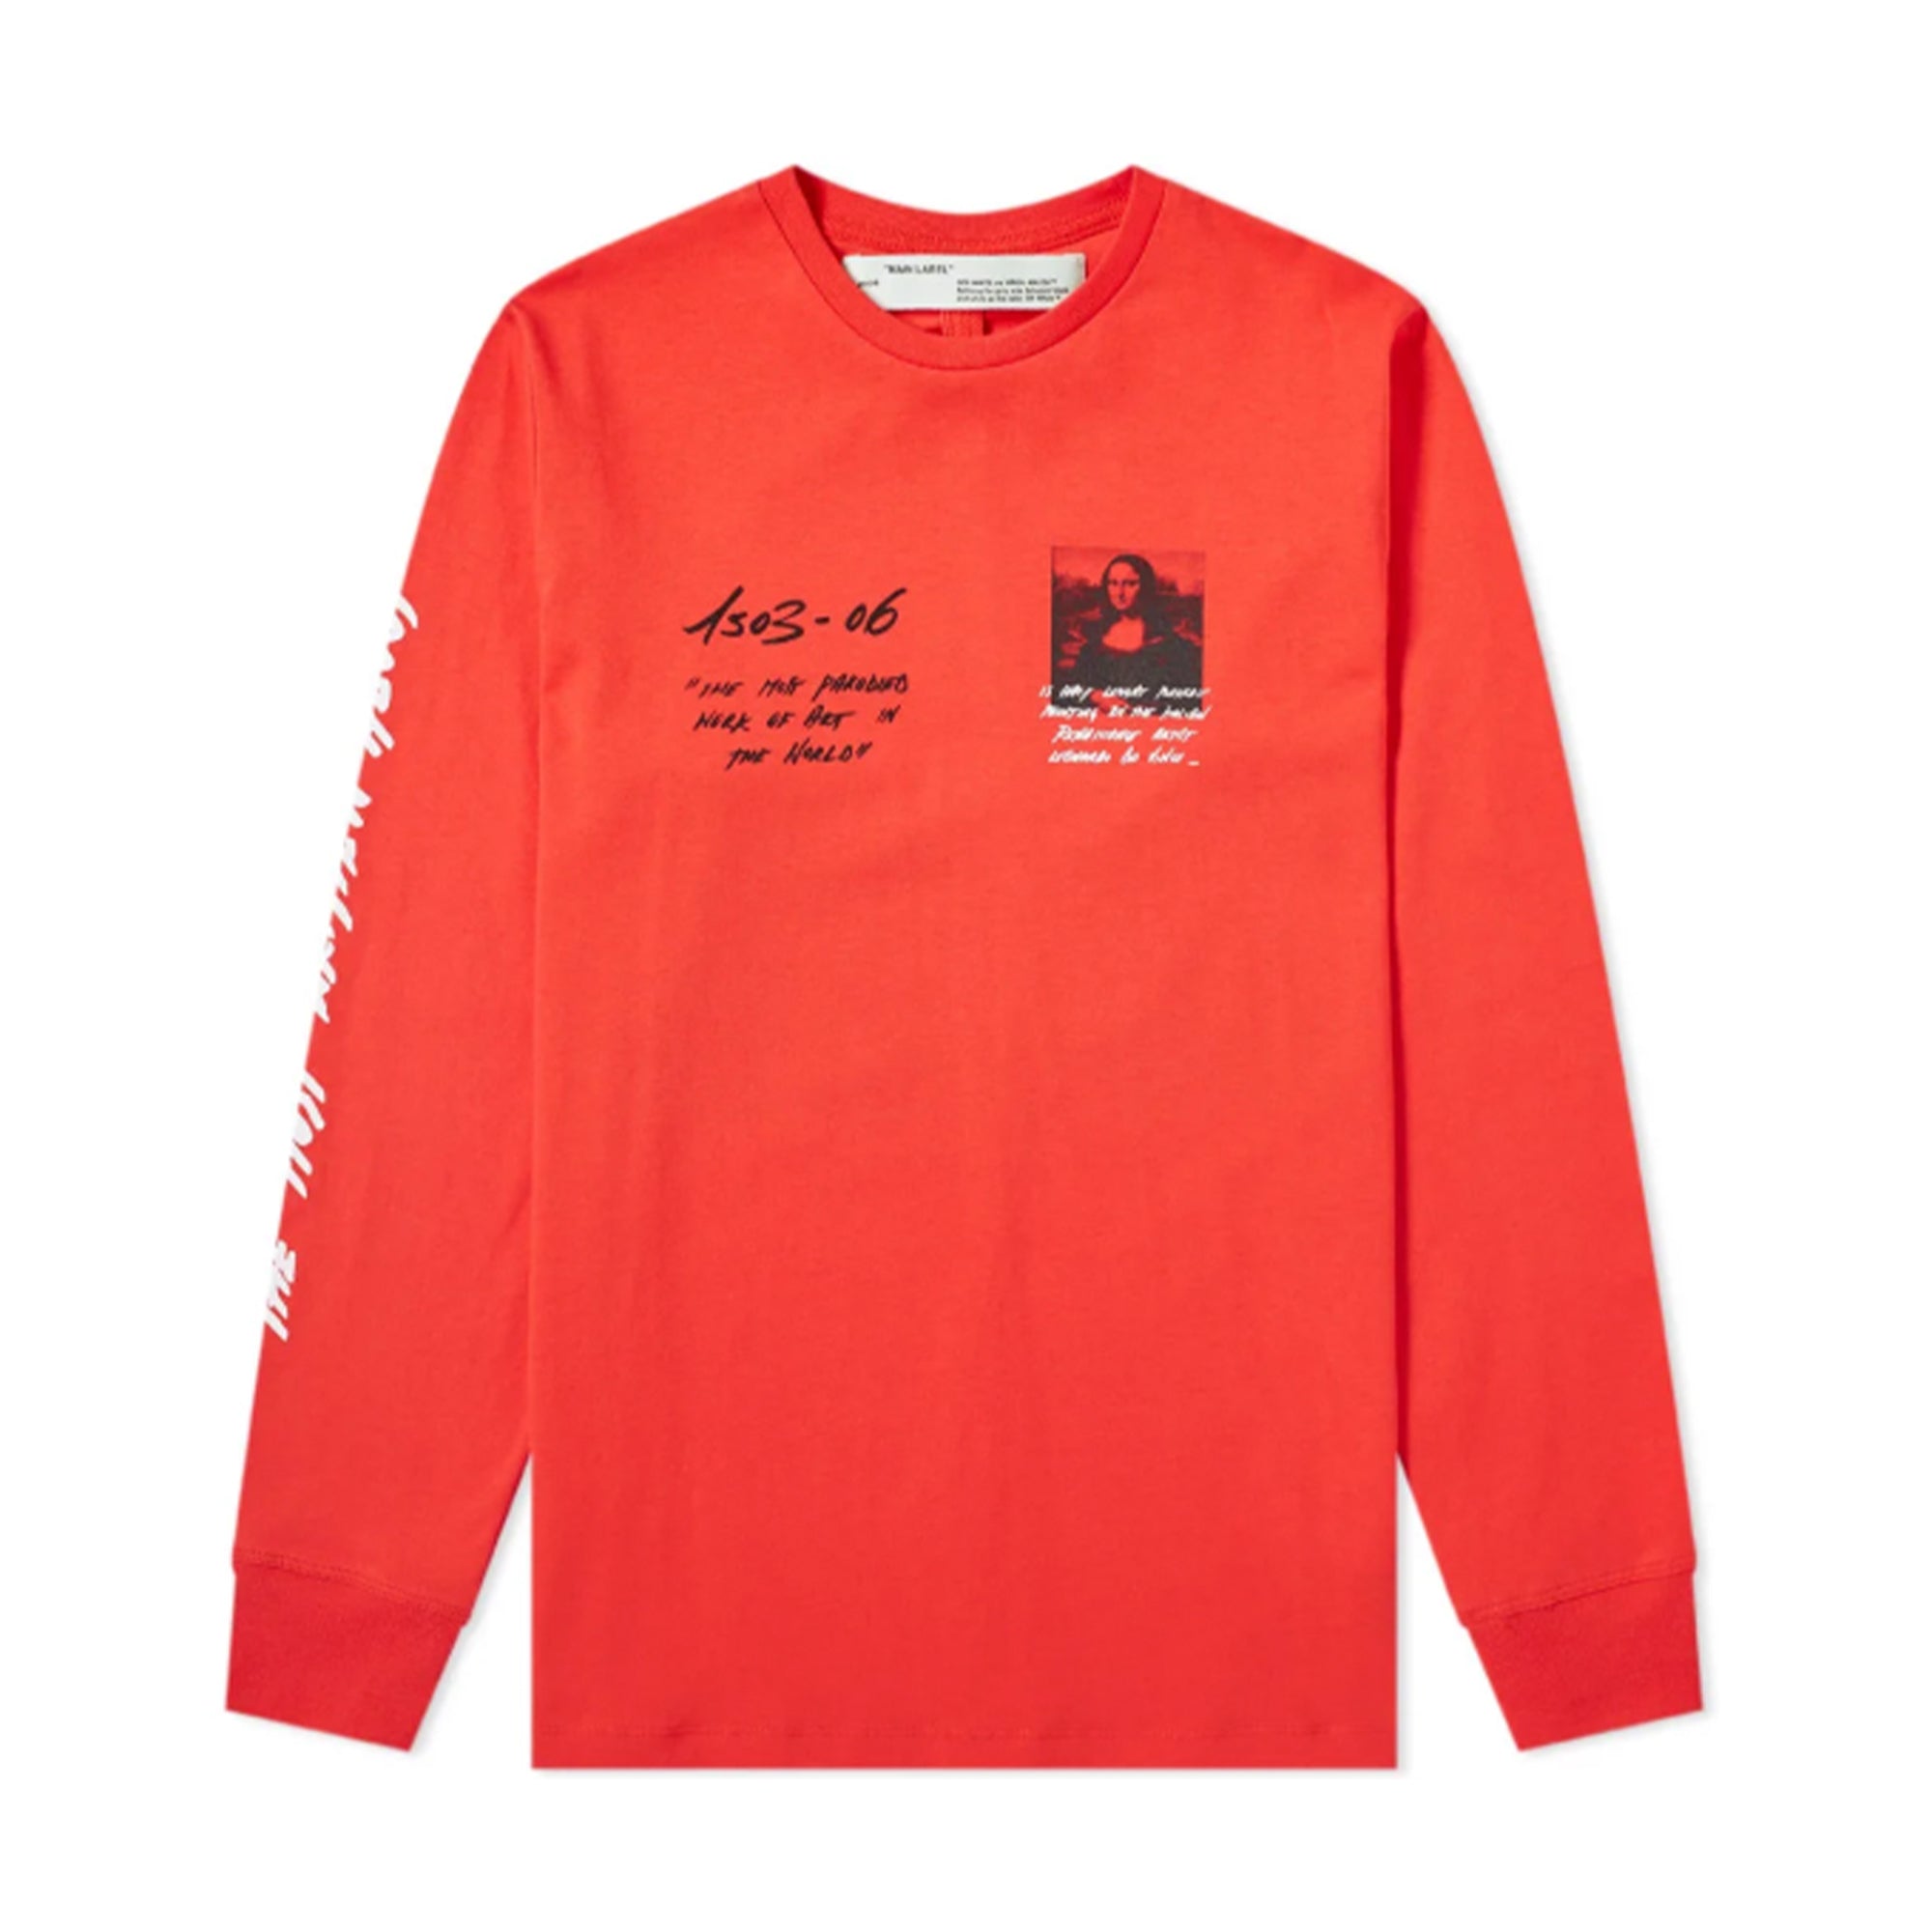 Off-White SS19 Mona Lisa Long-Sleeve Red-PLUS